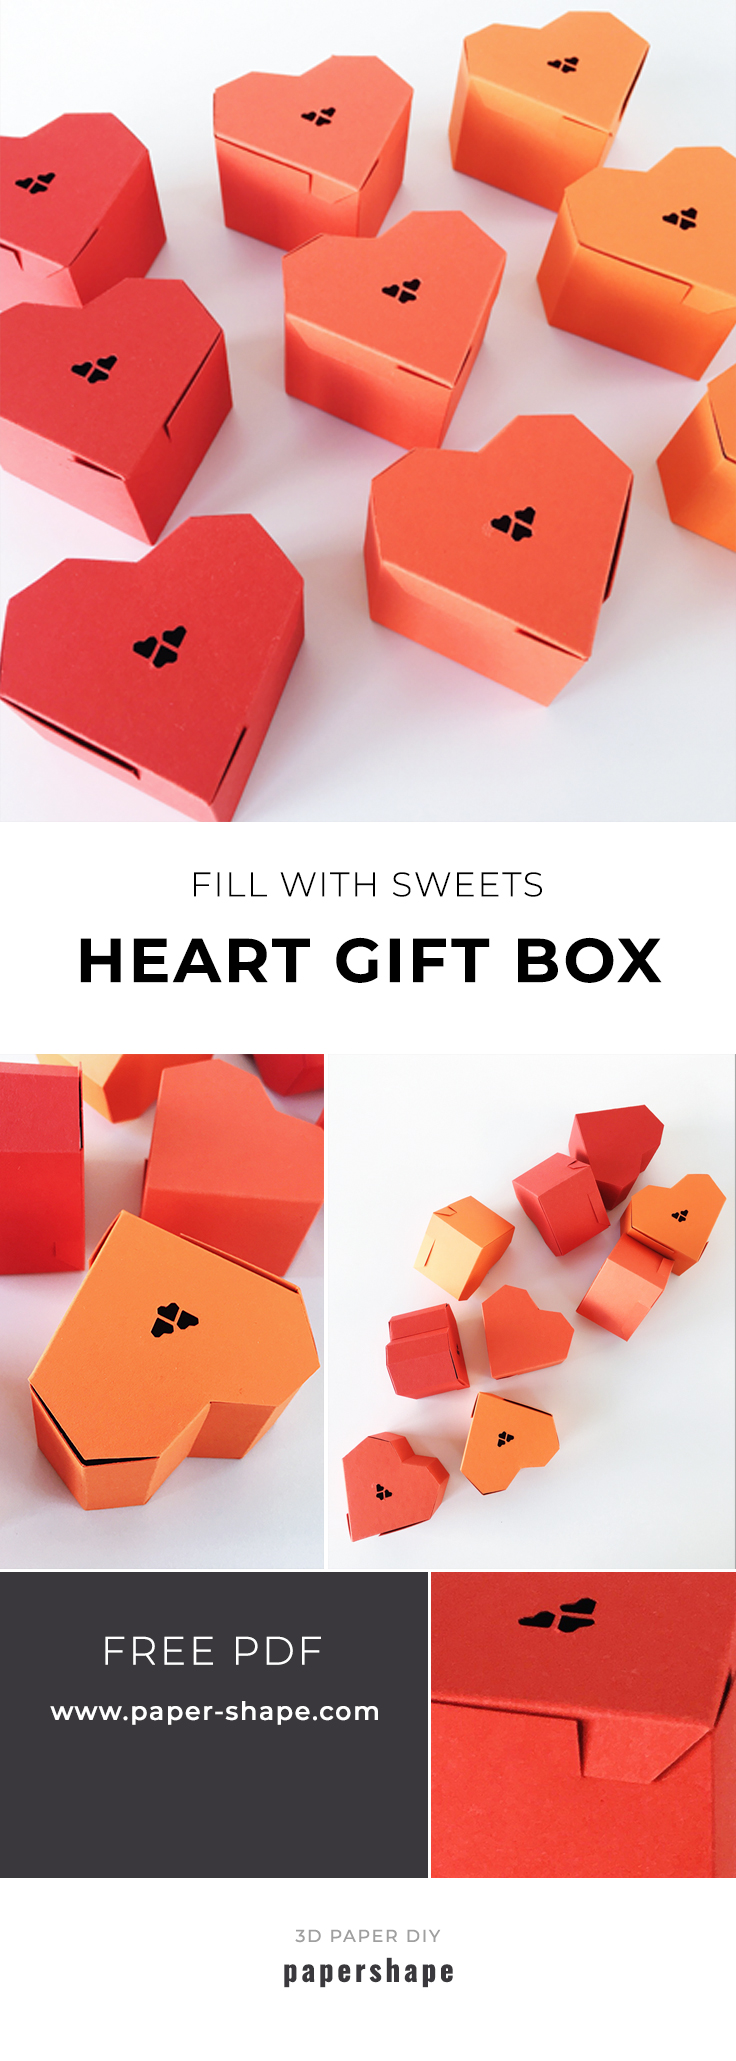 diy paper craft tutorial: heart gift box with free printable from #papershape